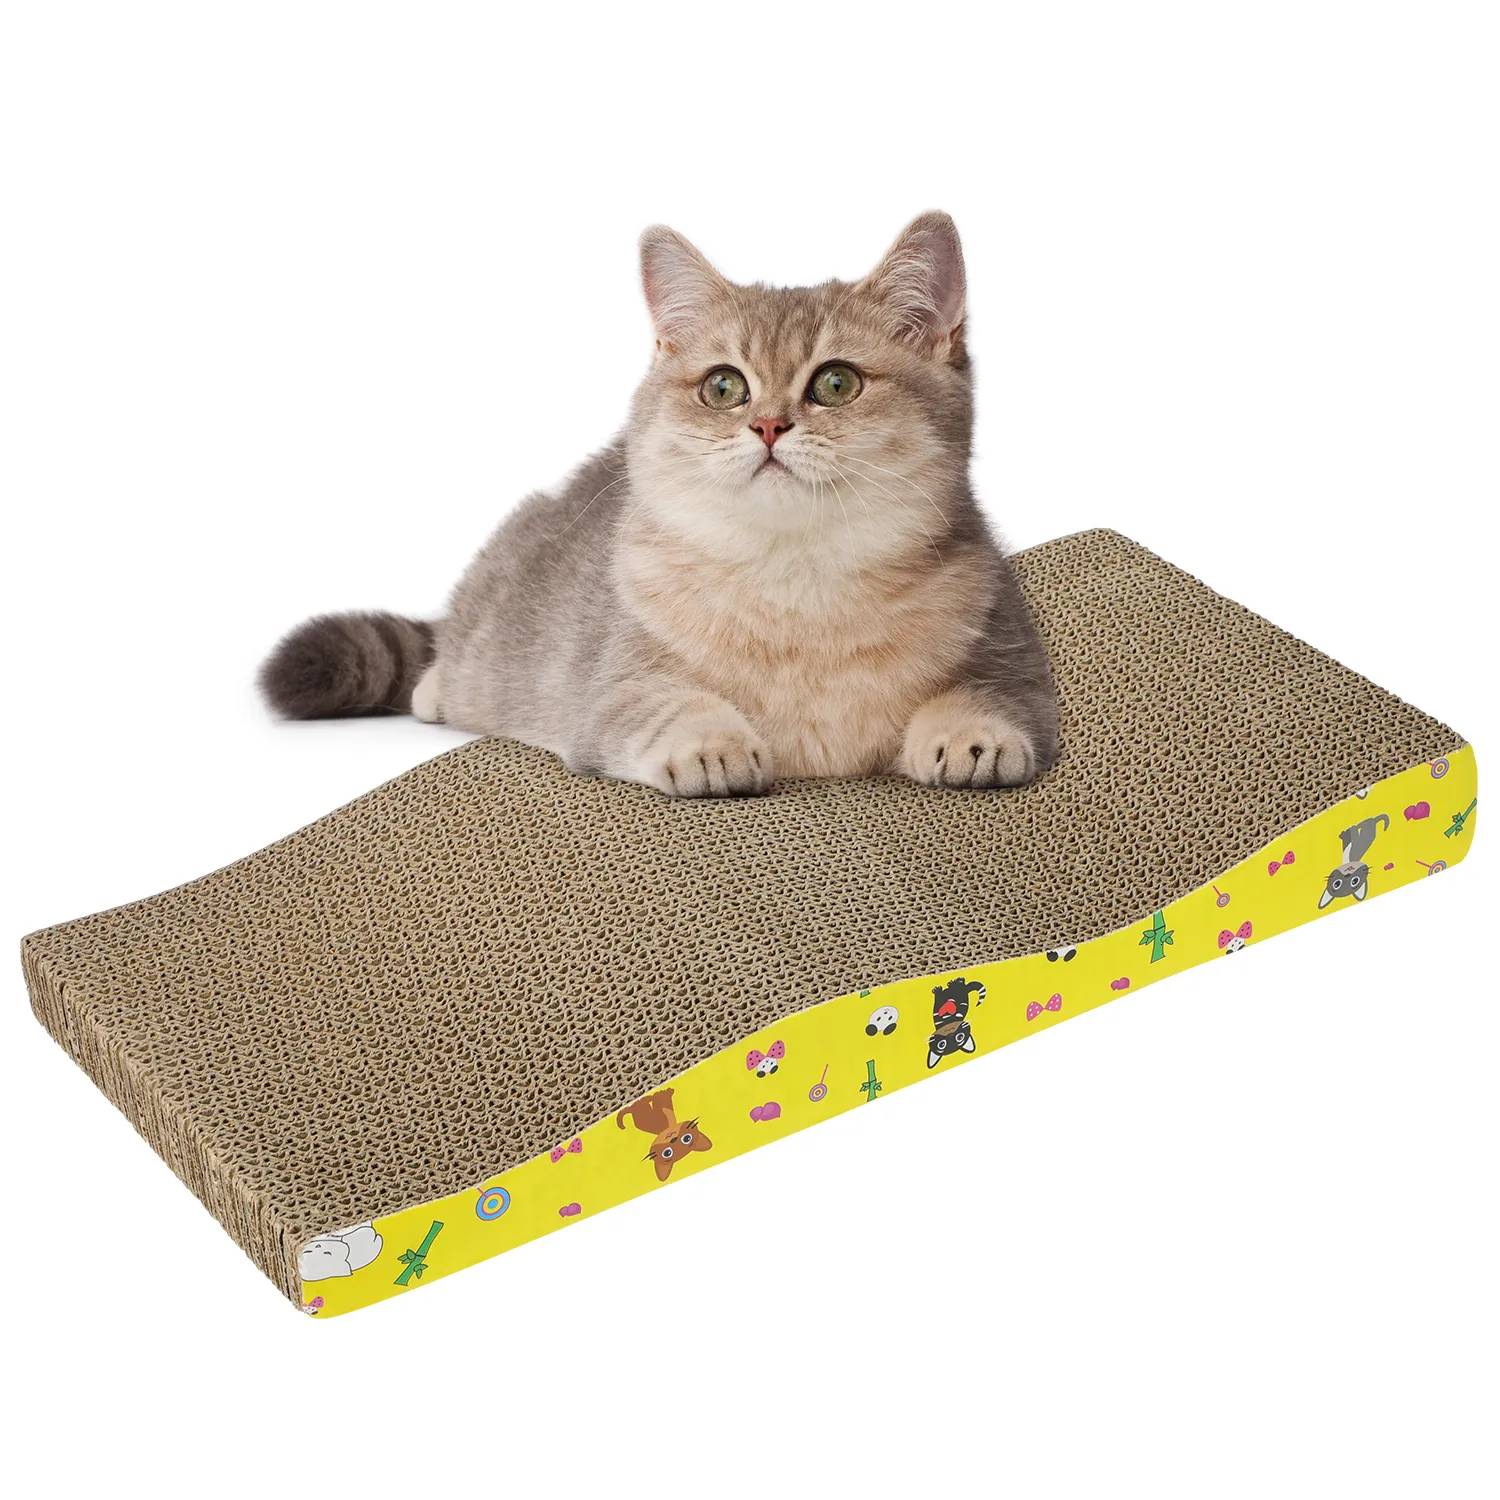 Cat Furniture Scratchers Creative Scratching Board Mat Scraper Claw Paw Toy for Scratcher Equipment Kitten Product Abreaktion Protector 230227